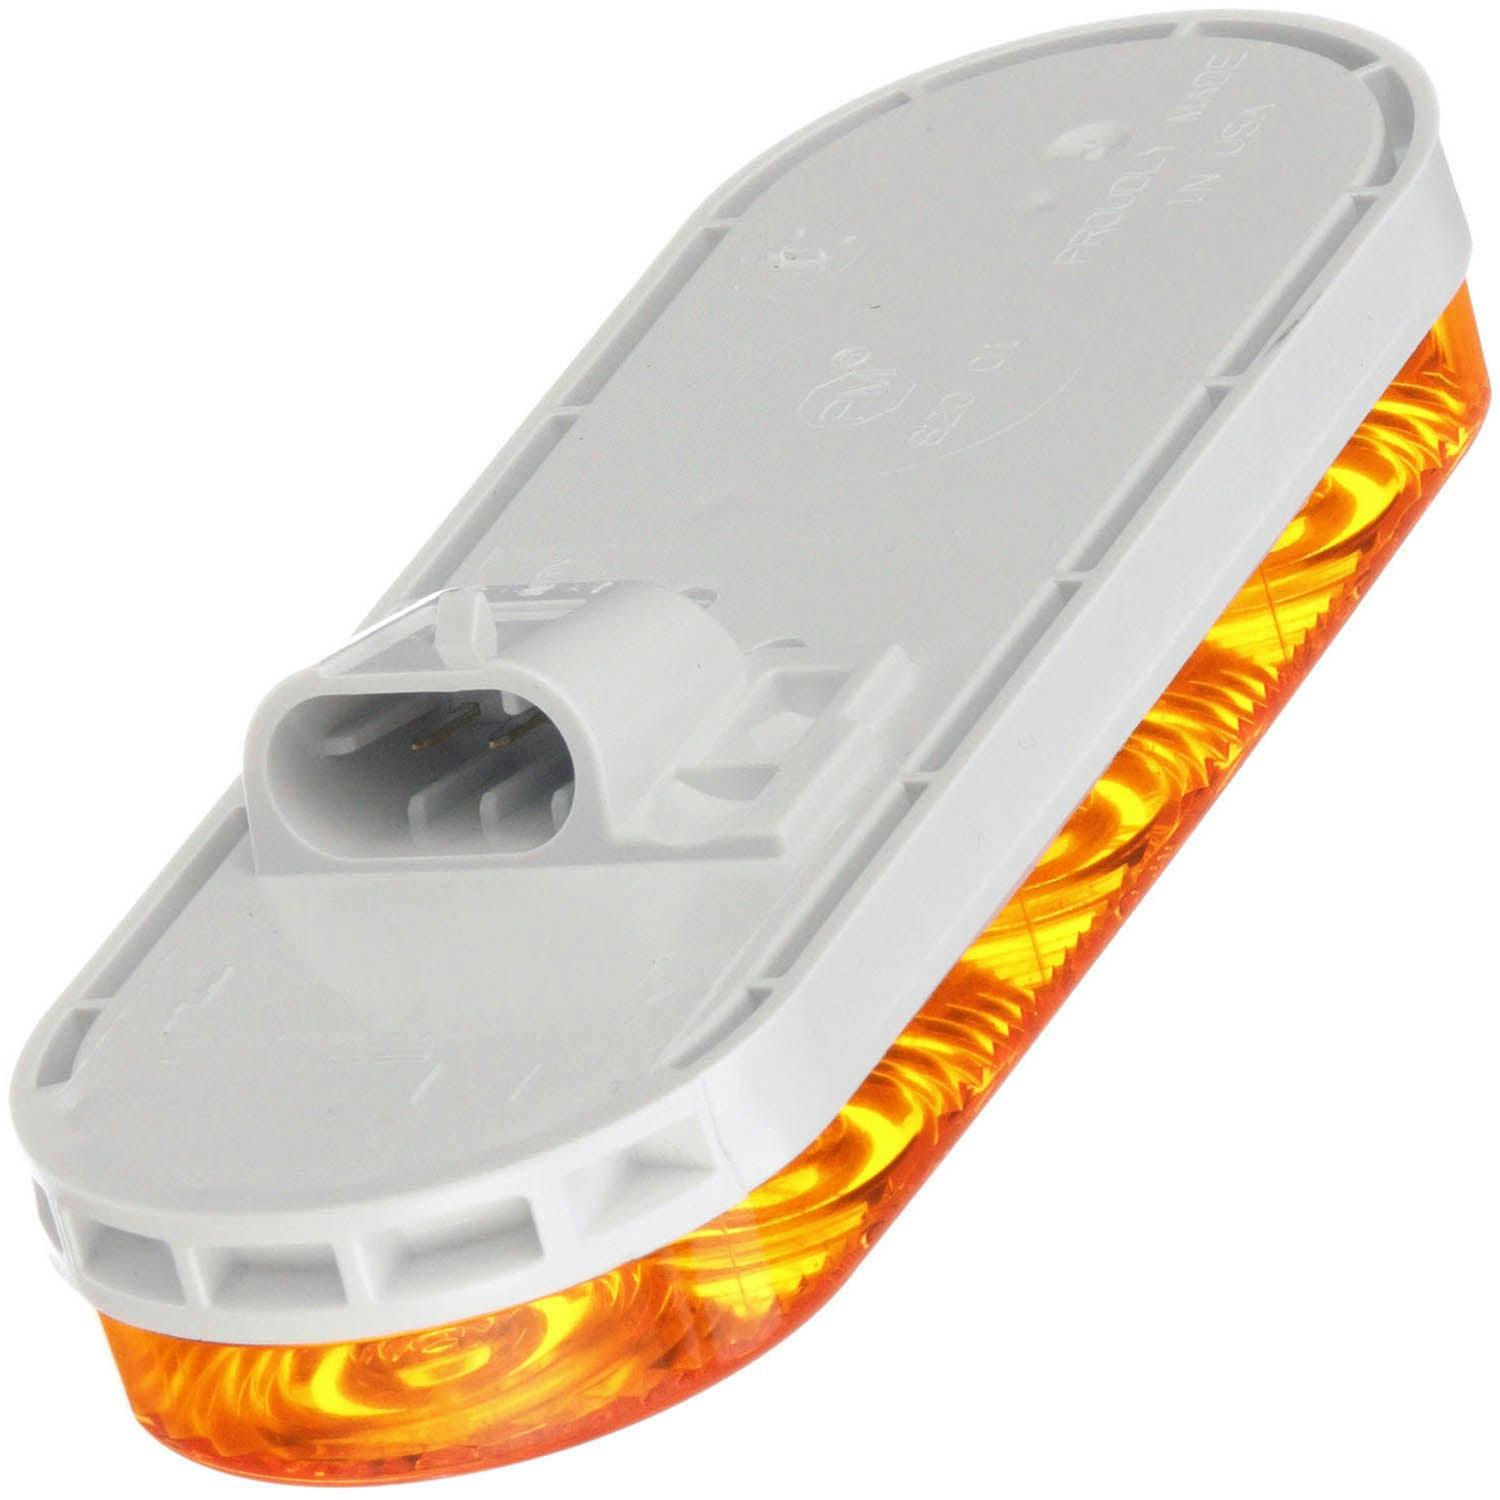 LED Front Turn Signal, Oval, Ece, AMP, Grommet-Mount, 6.50"X2.25" Multi-volt, amber (Pack of 6) - 820A_rear_f727aa84-4ebe-4fc8-954e-386e336ed955